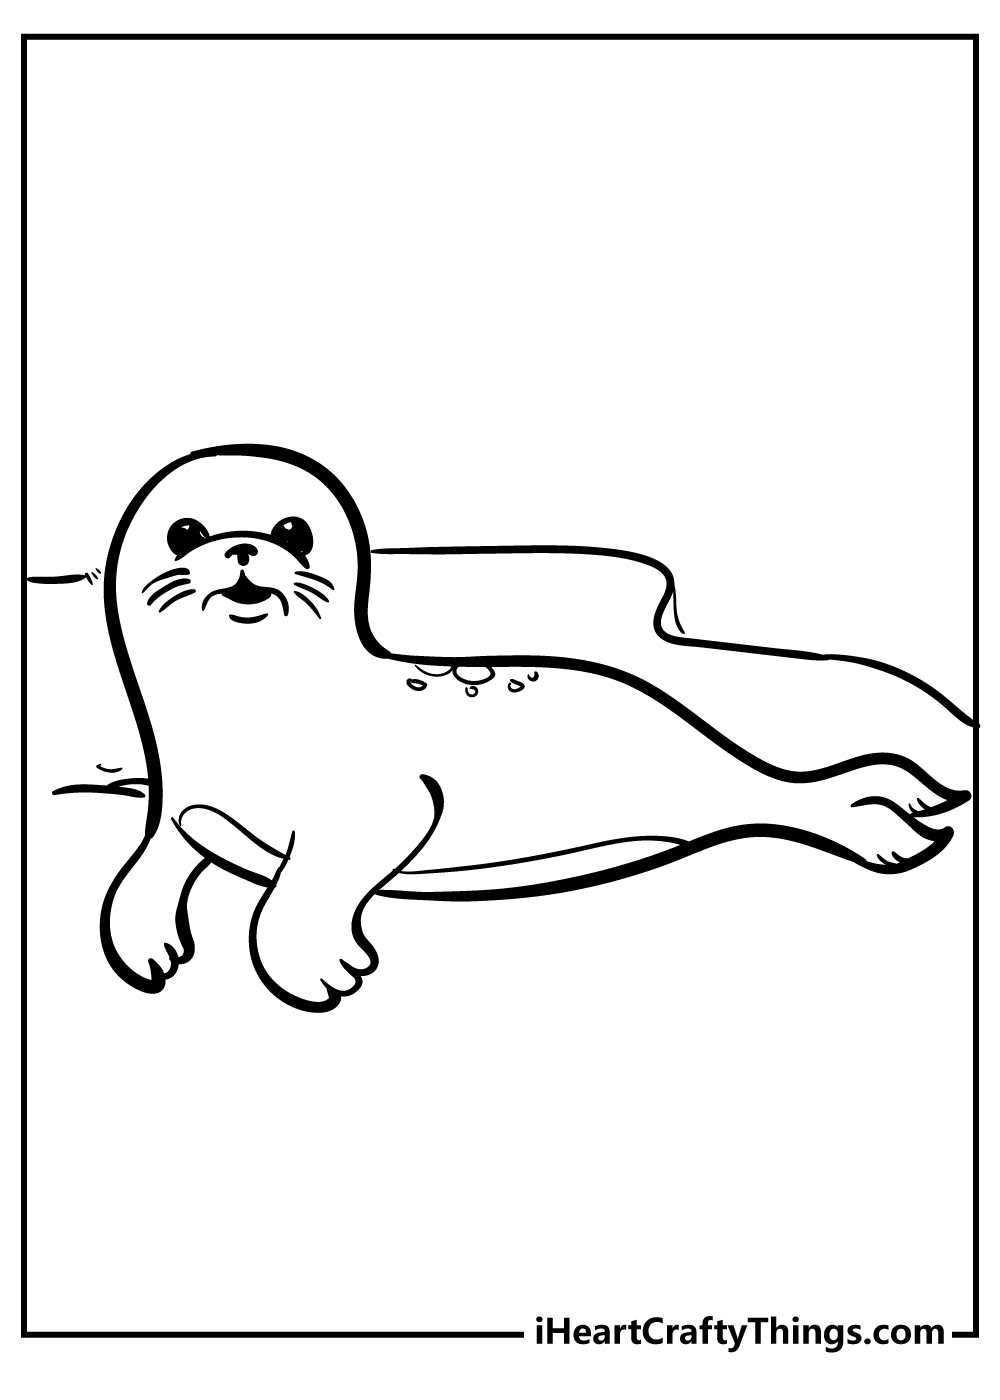 Seal Coloring Pages for preschoolers free printable